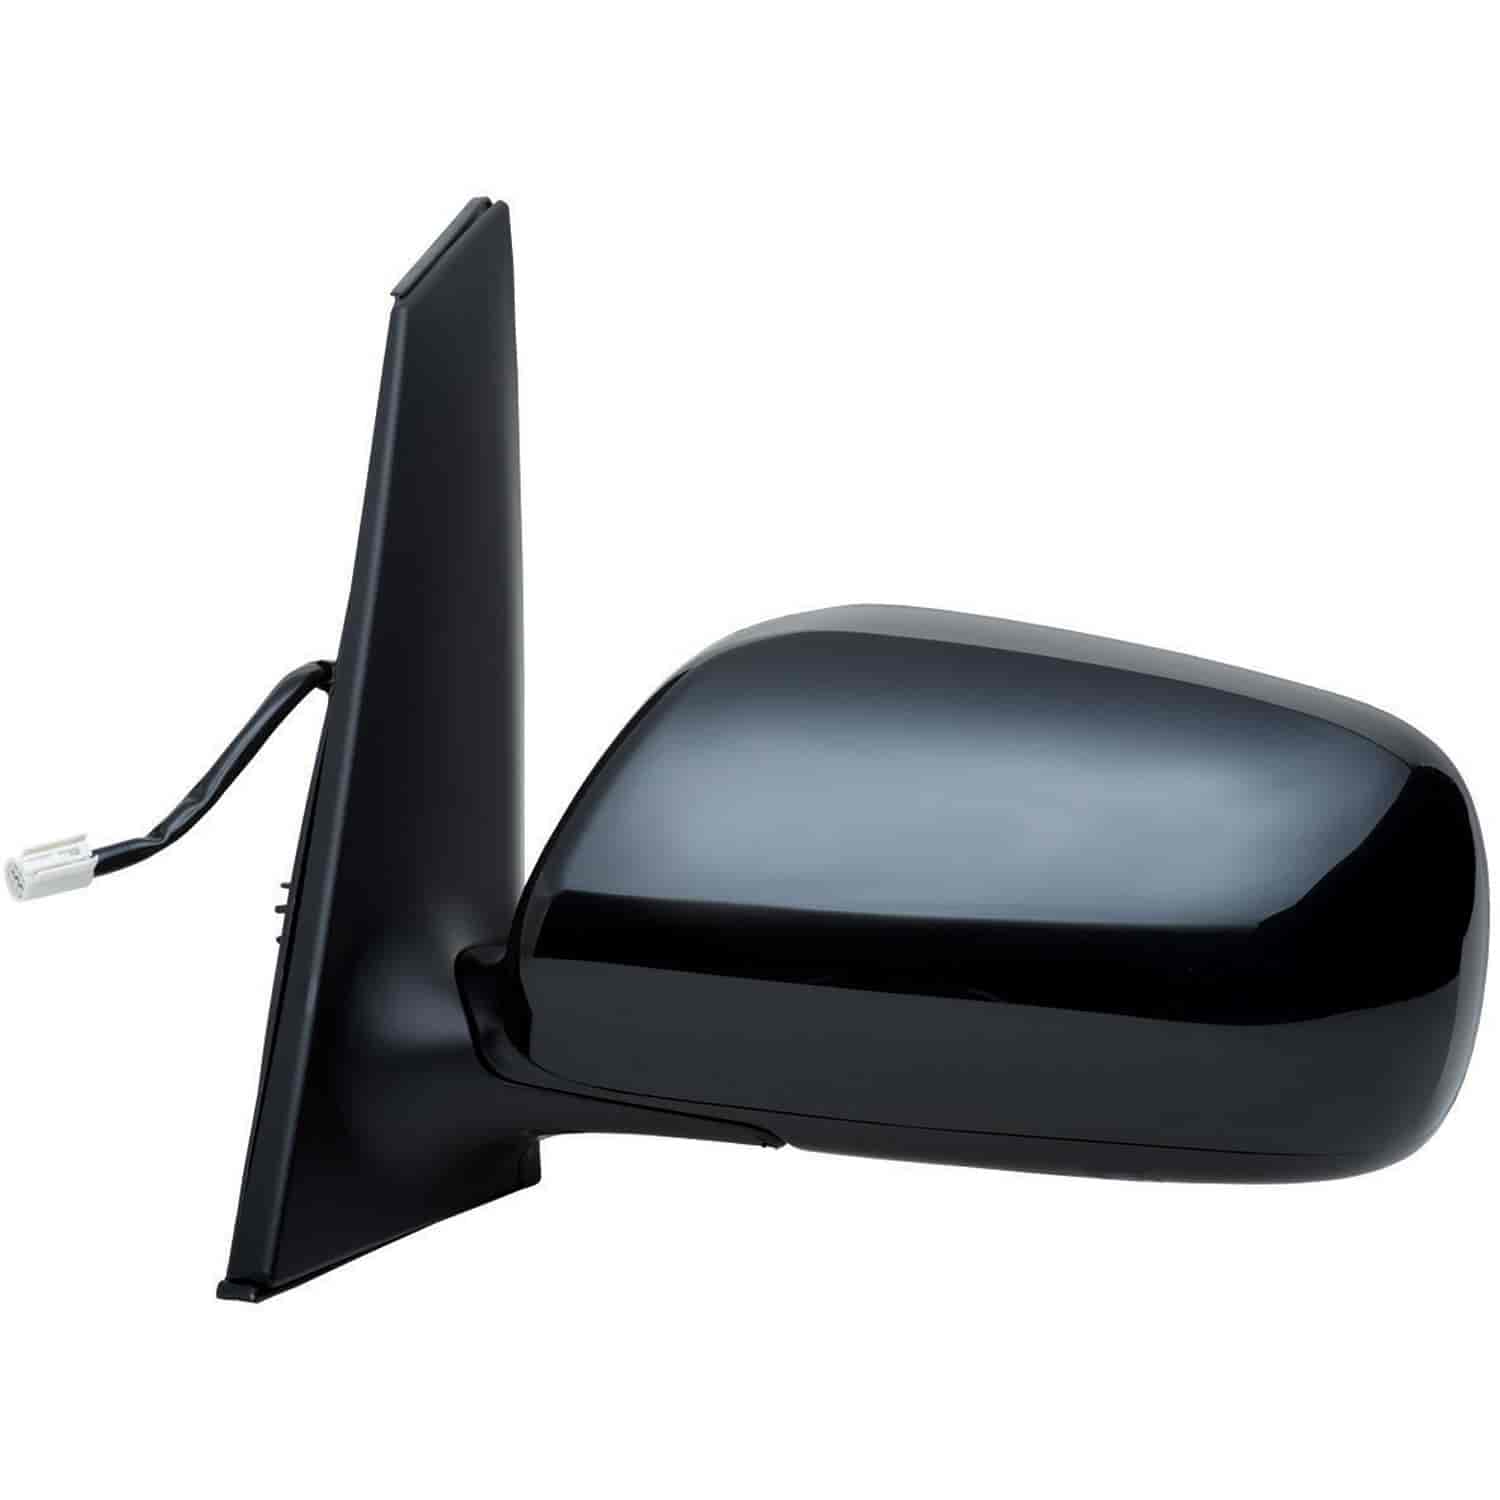 OEM Style Replacement mirror for 04-09 Toyota Prius driver side mirror tested to fit and function li